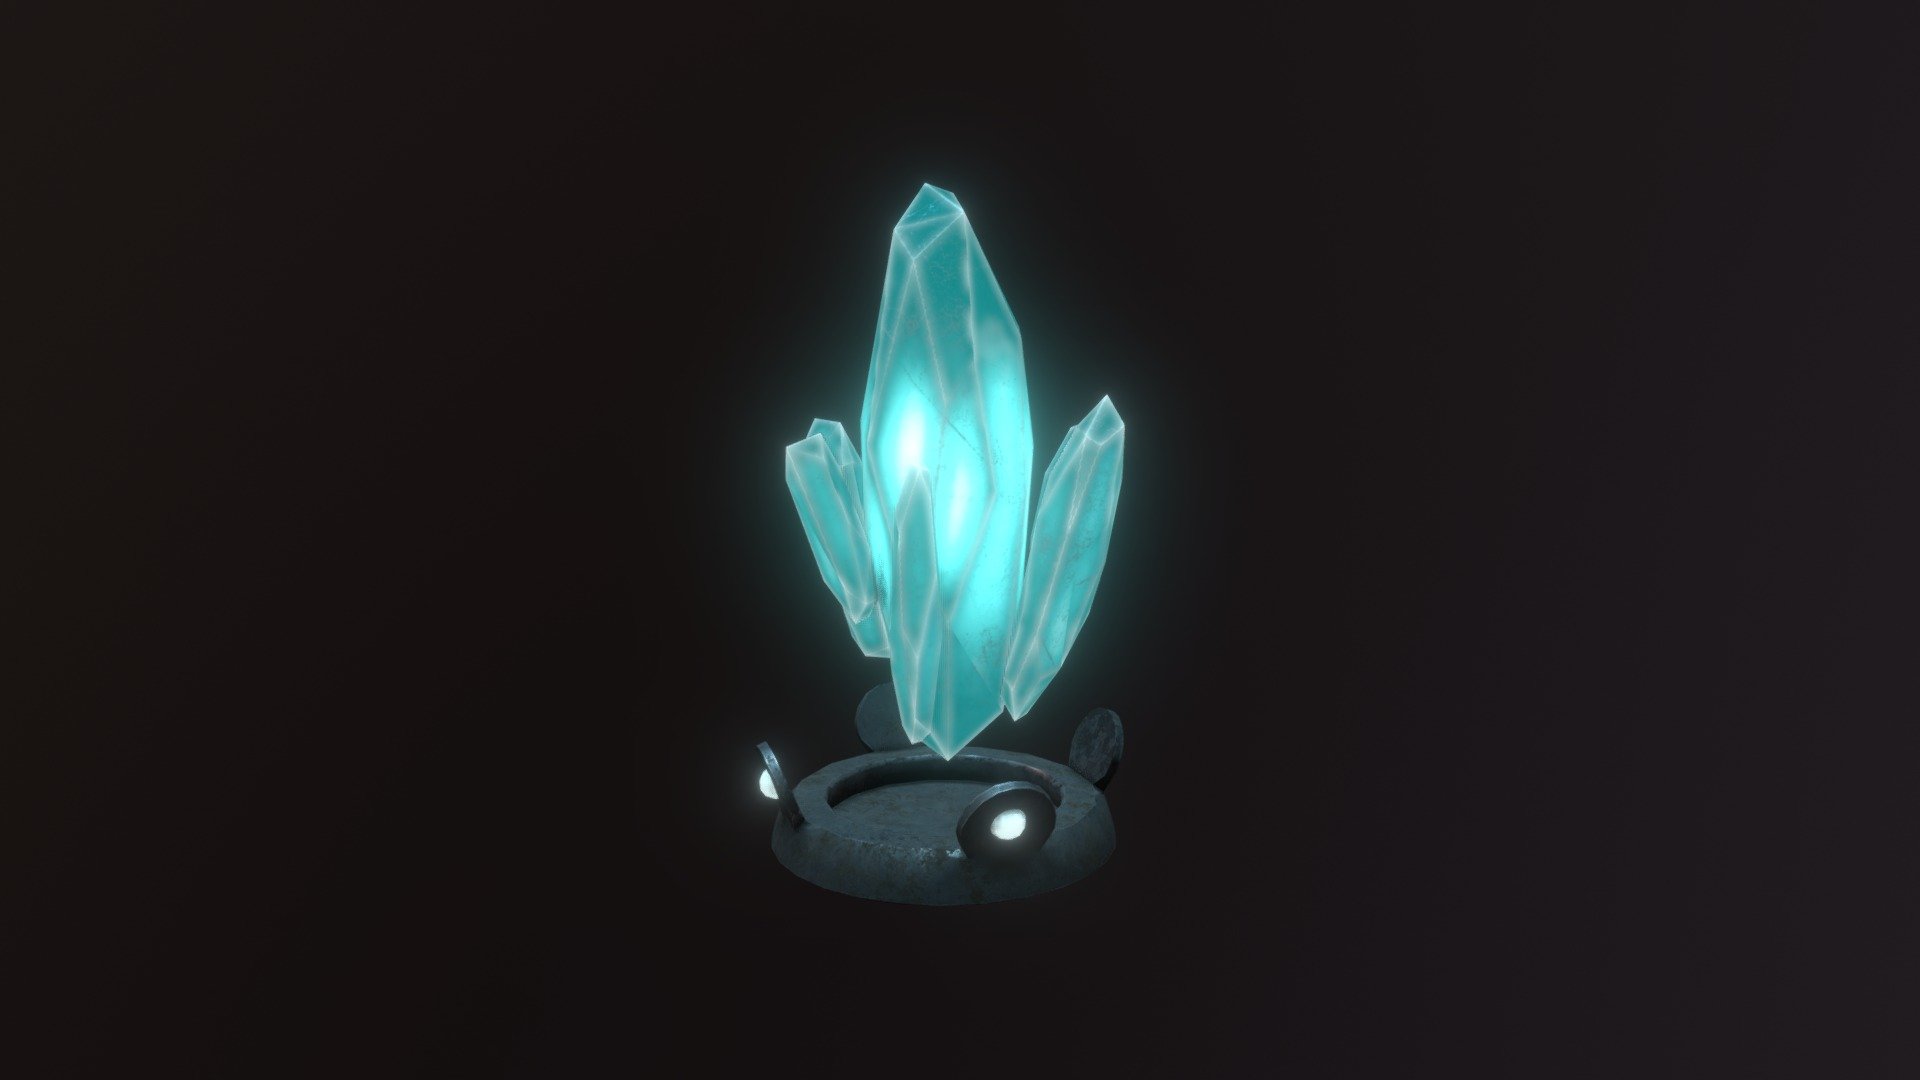 &ldquo;This crystal provides a safe light zone and keeps the darkness and the enemies at bay.